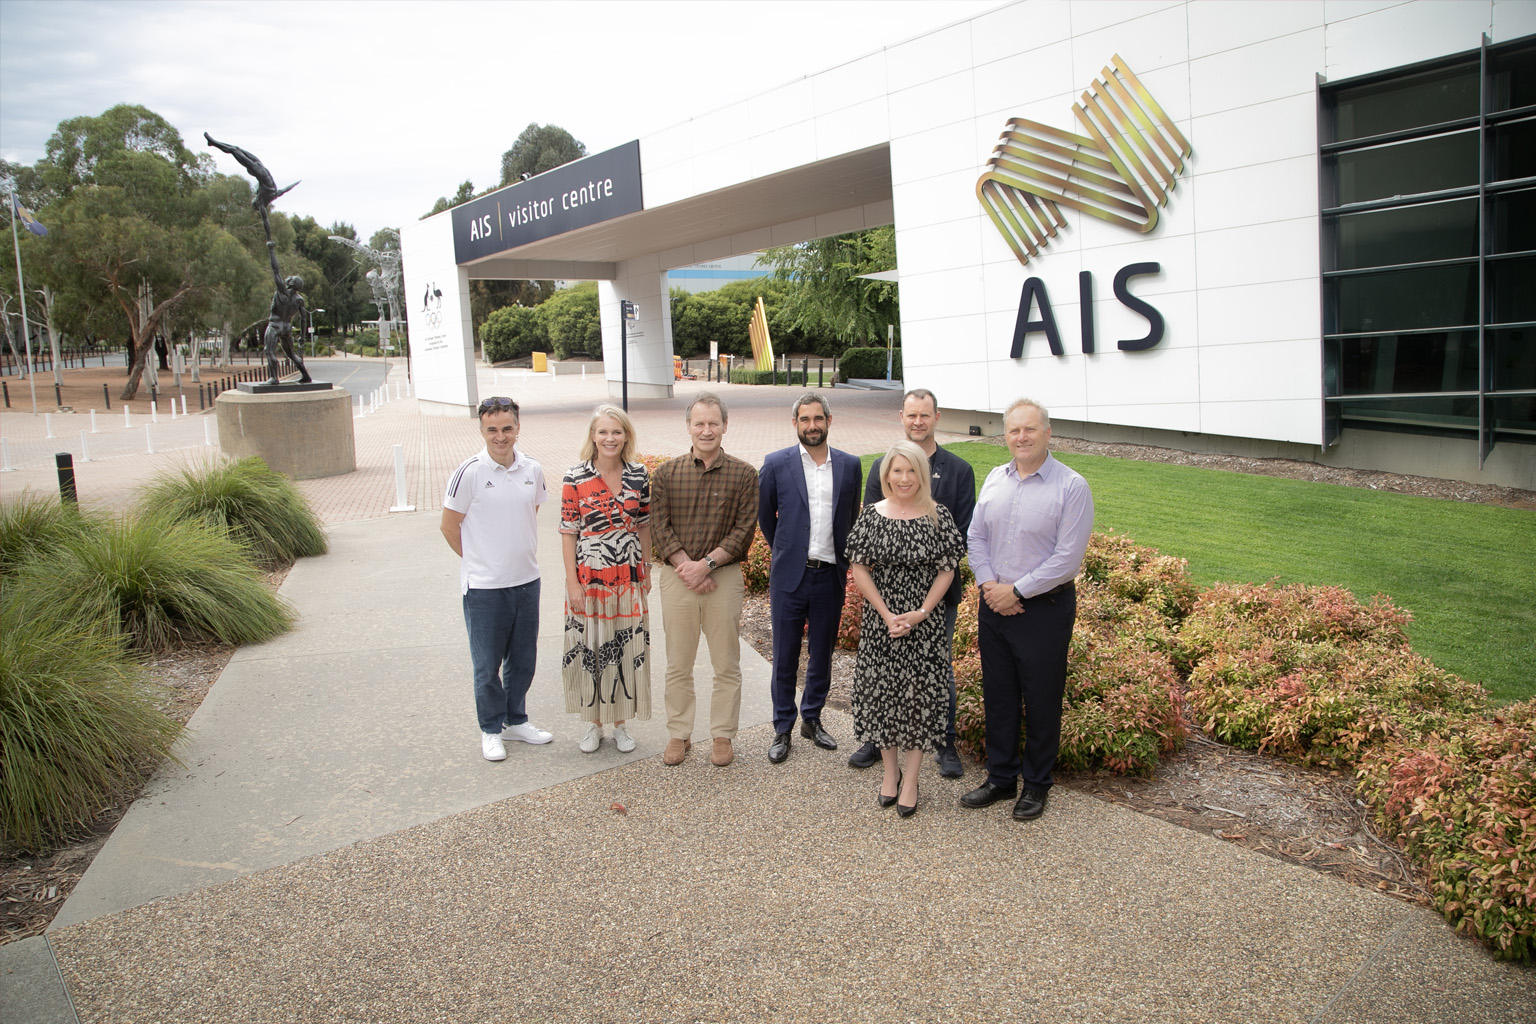 A group of people standing outside the AIS Visitor Centre, with a sculpture and gardens in the background.